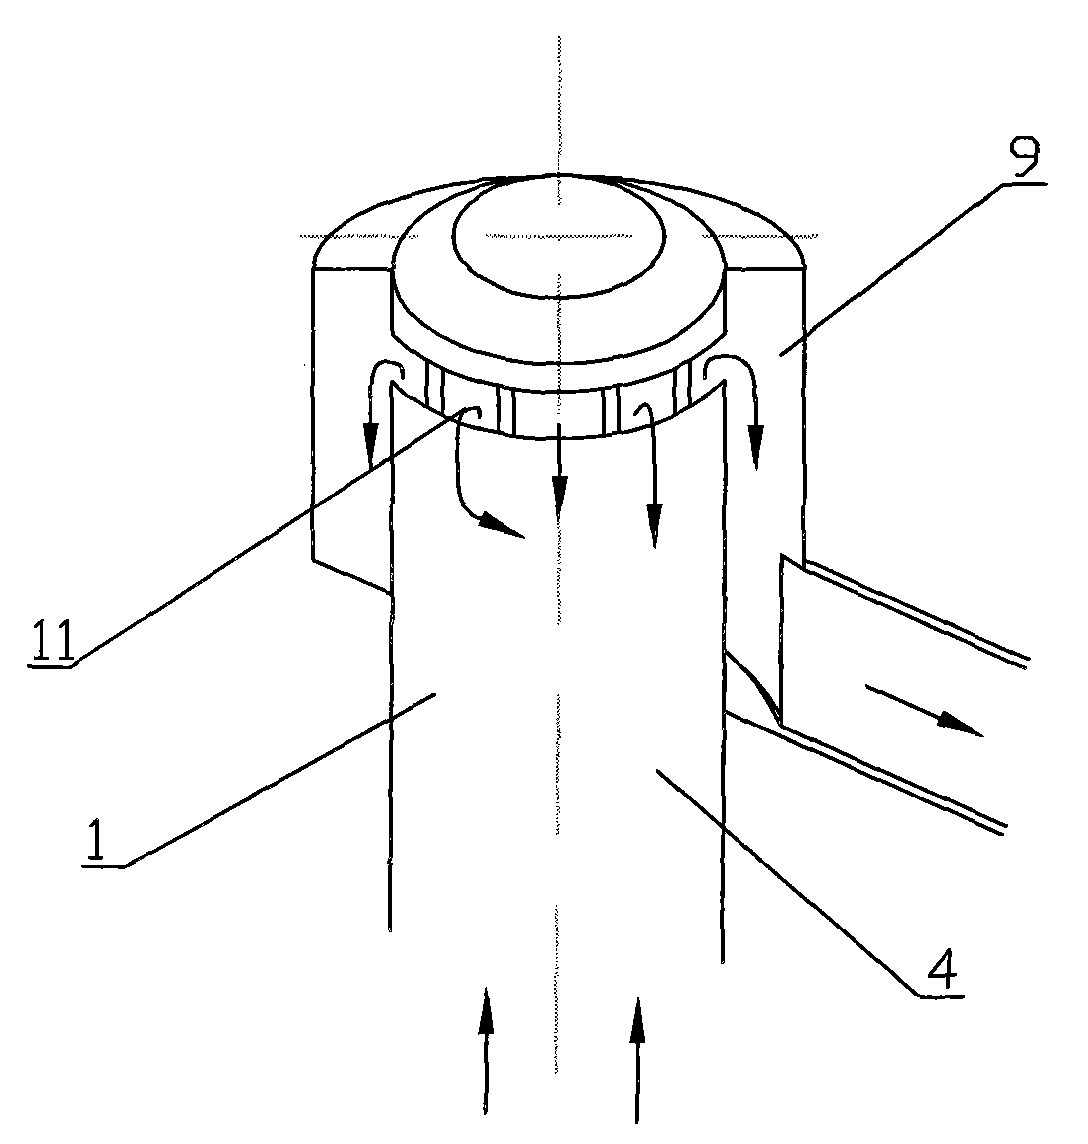 Fluidized bed reaction tower